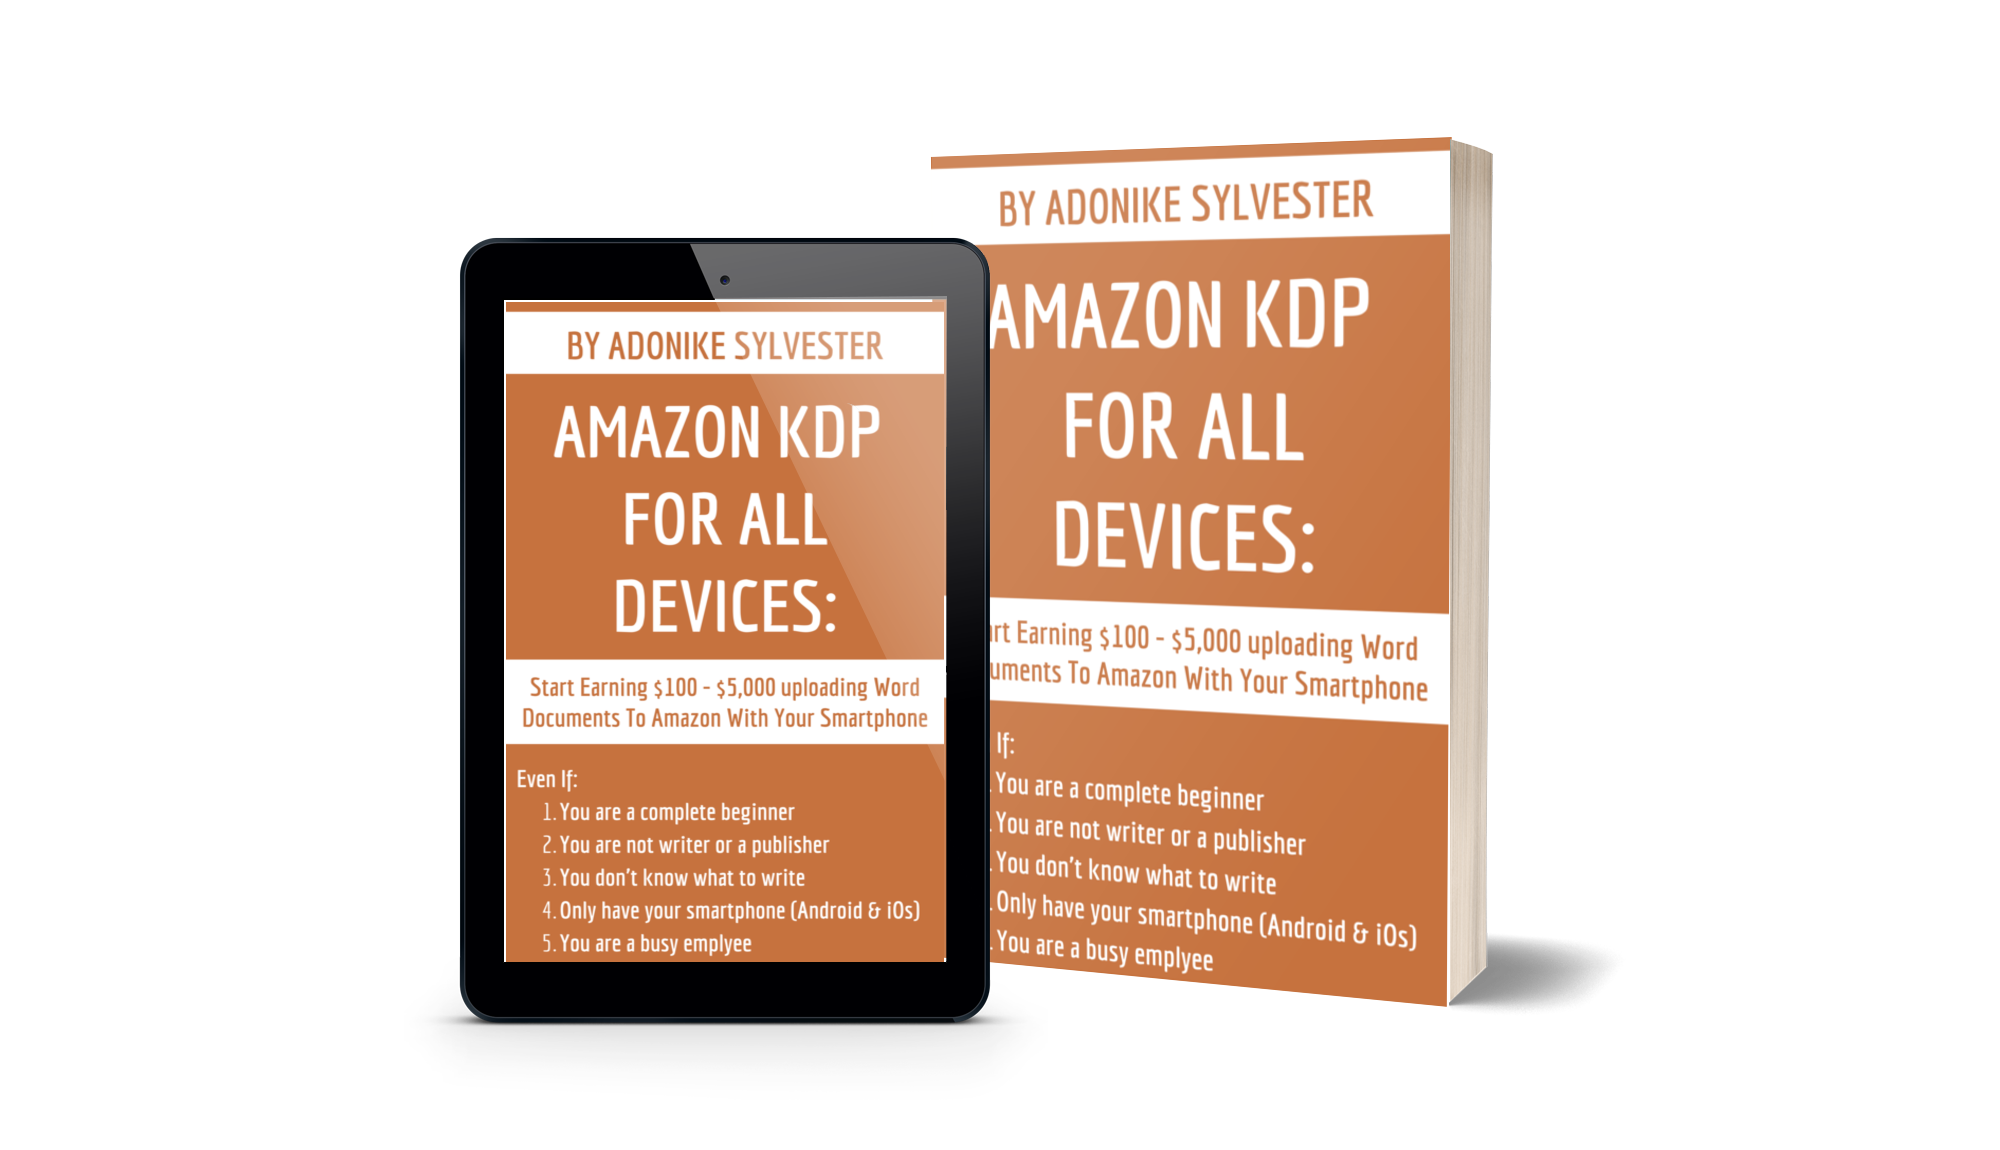 Amazon for all devices by Adonike Sylvester